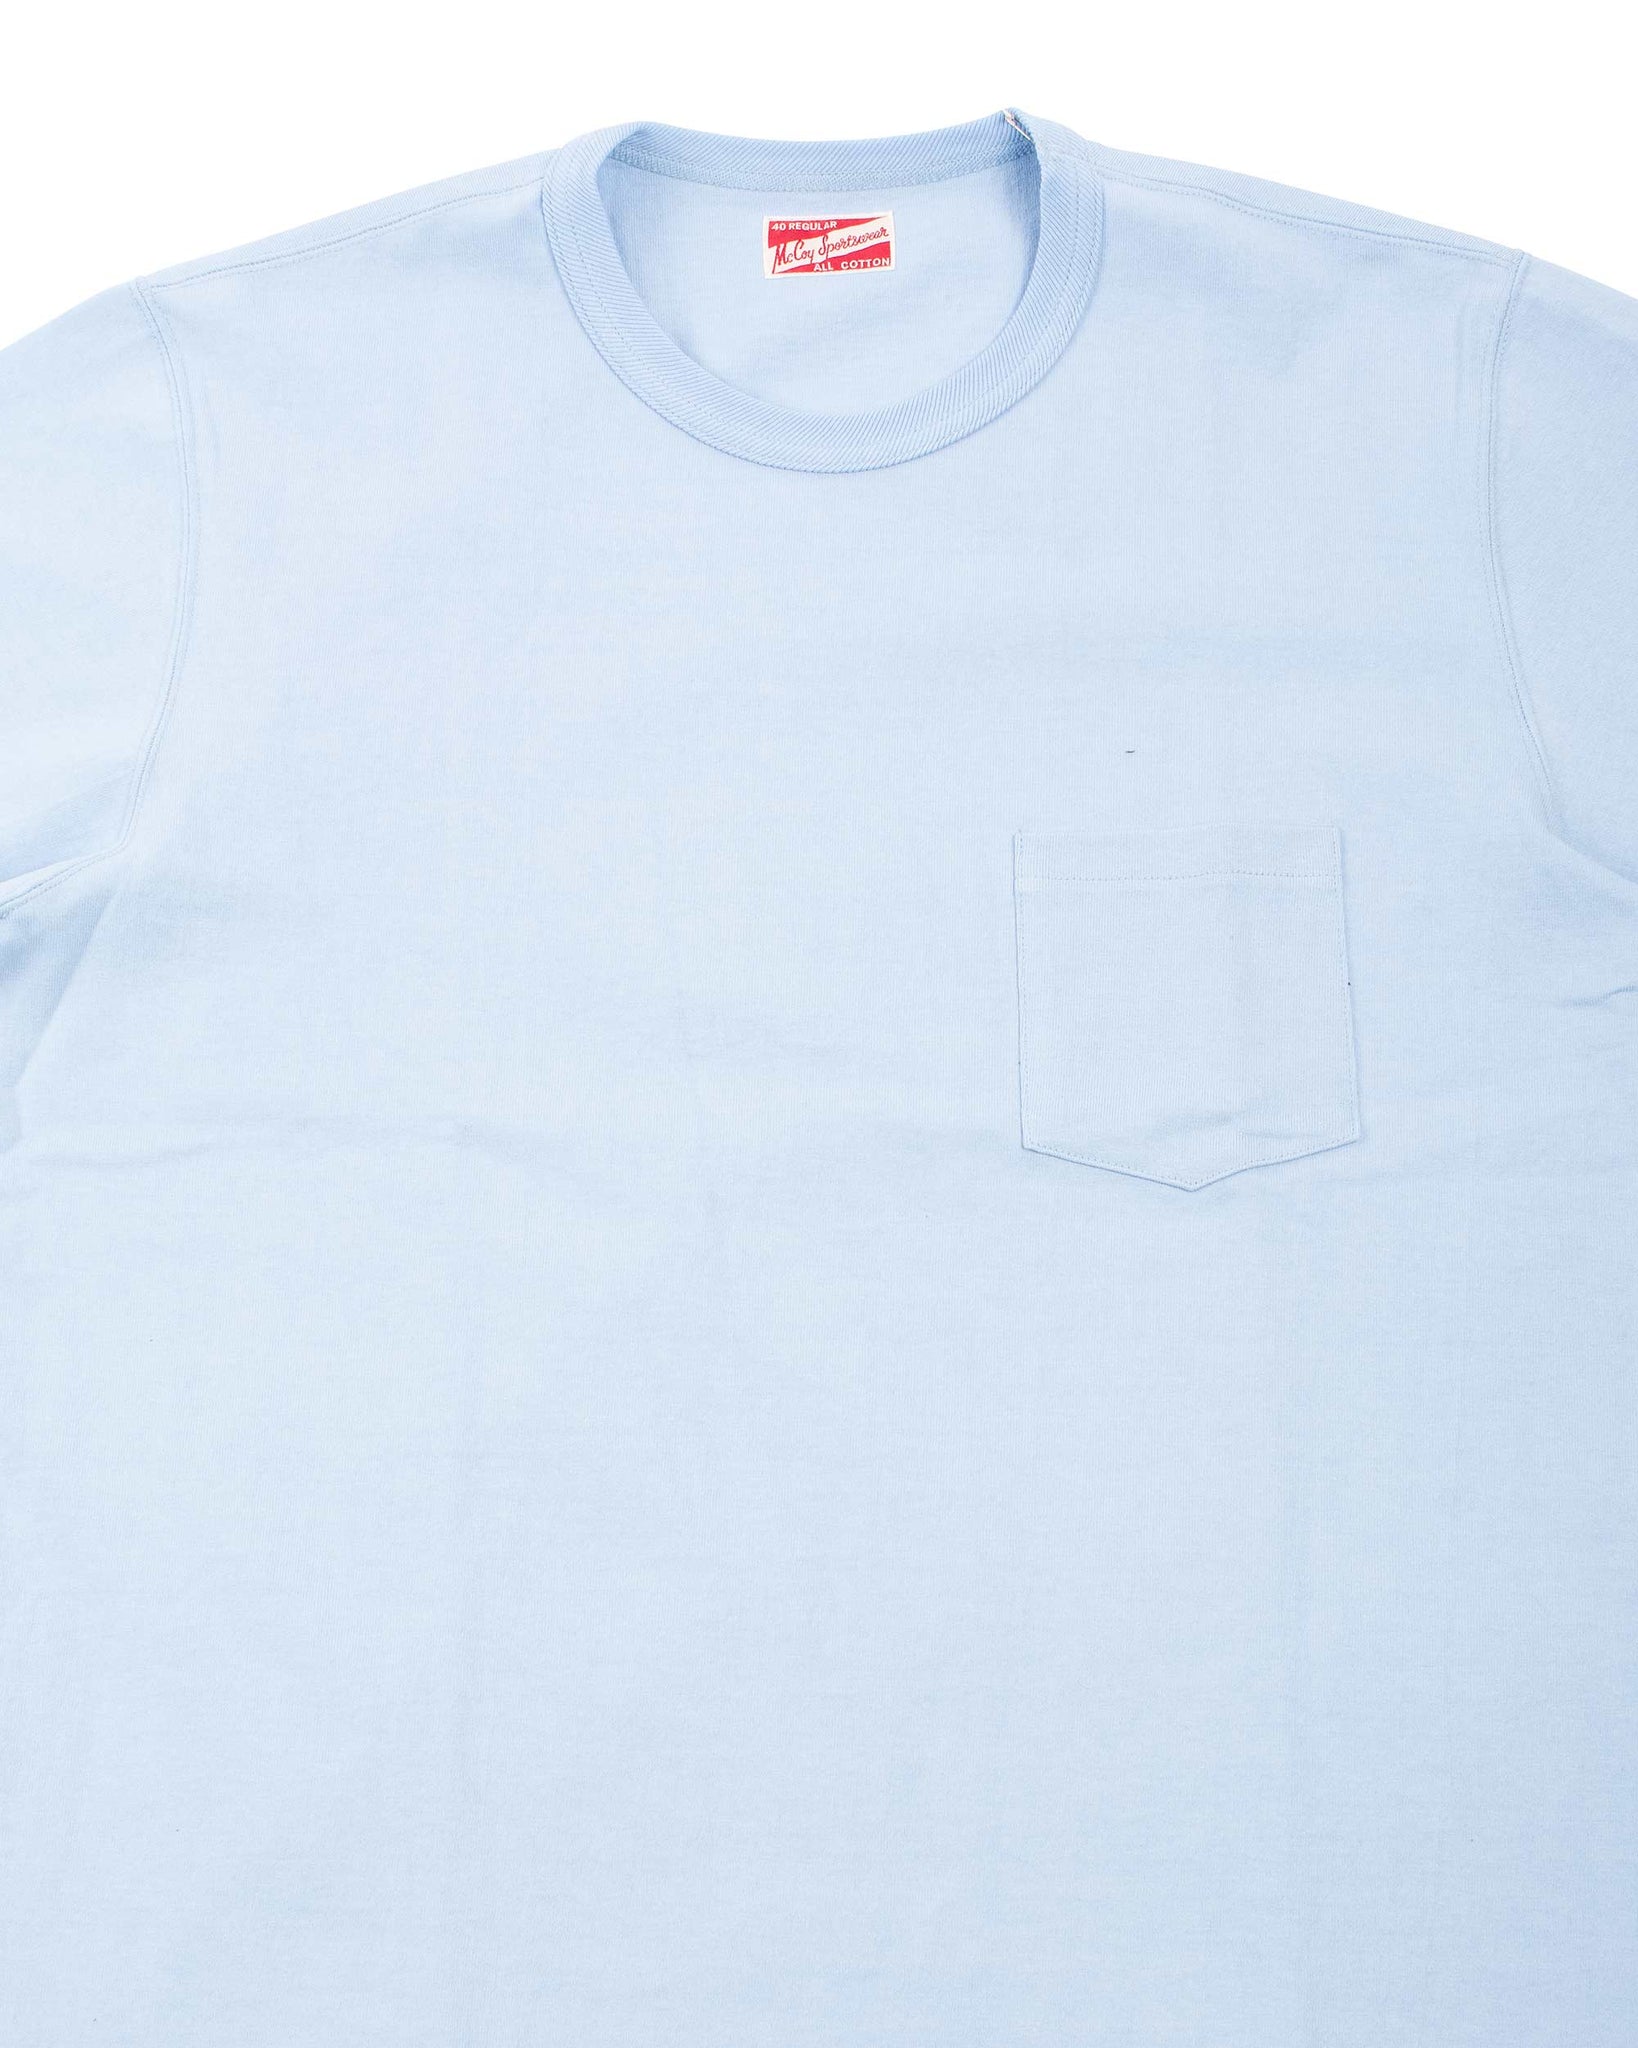 The Real McCoy's MC22006 Pocket Tee Saxe Details